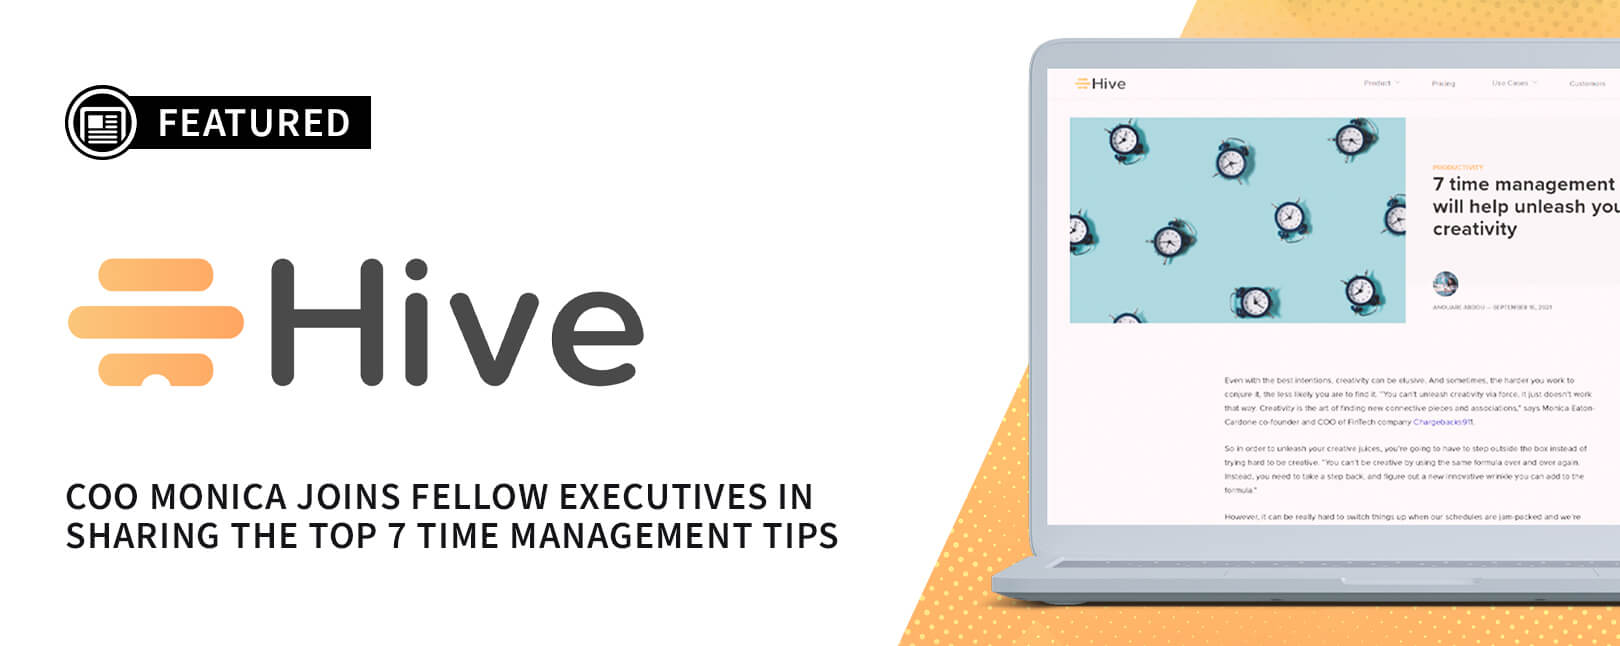 Chargebacks911® COO Offers Time Management Tips for Hive Blog